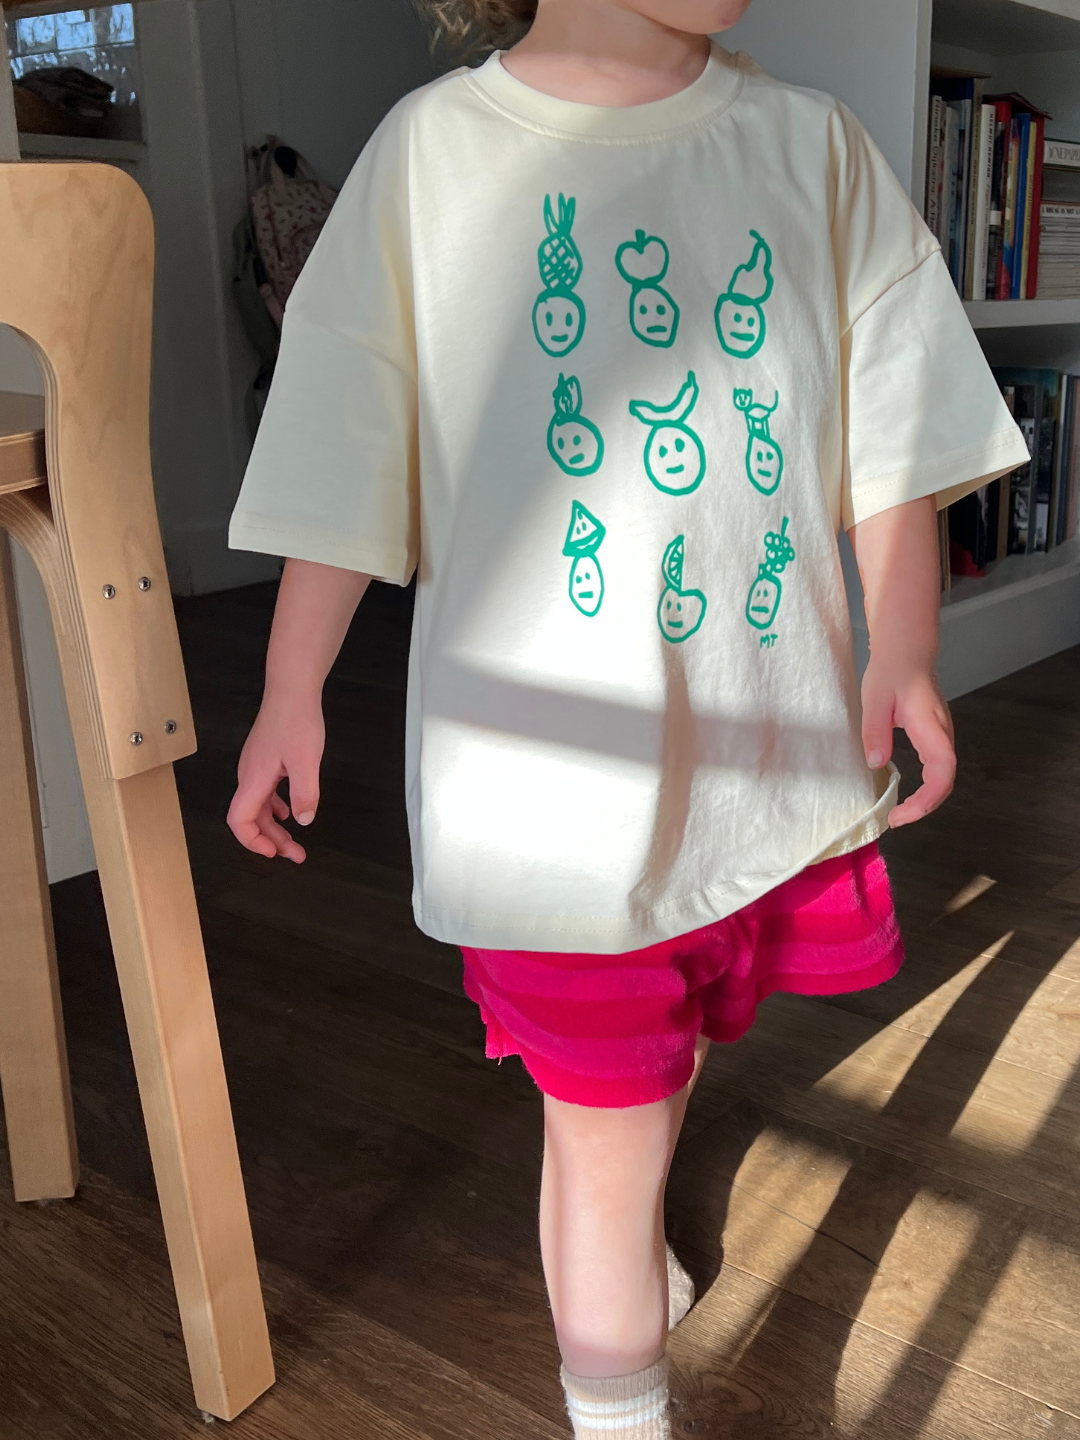 Cream | A child is wearing a cream Fruit Face tee with pink shorts indoors.